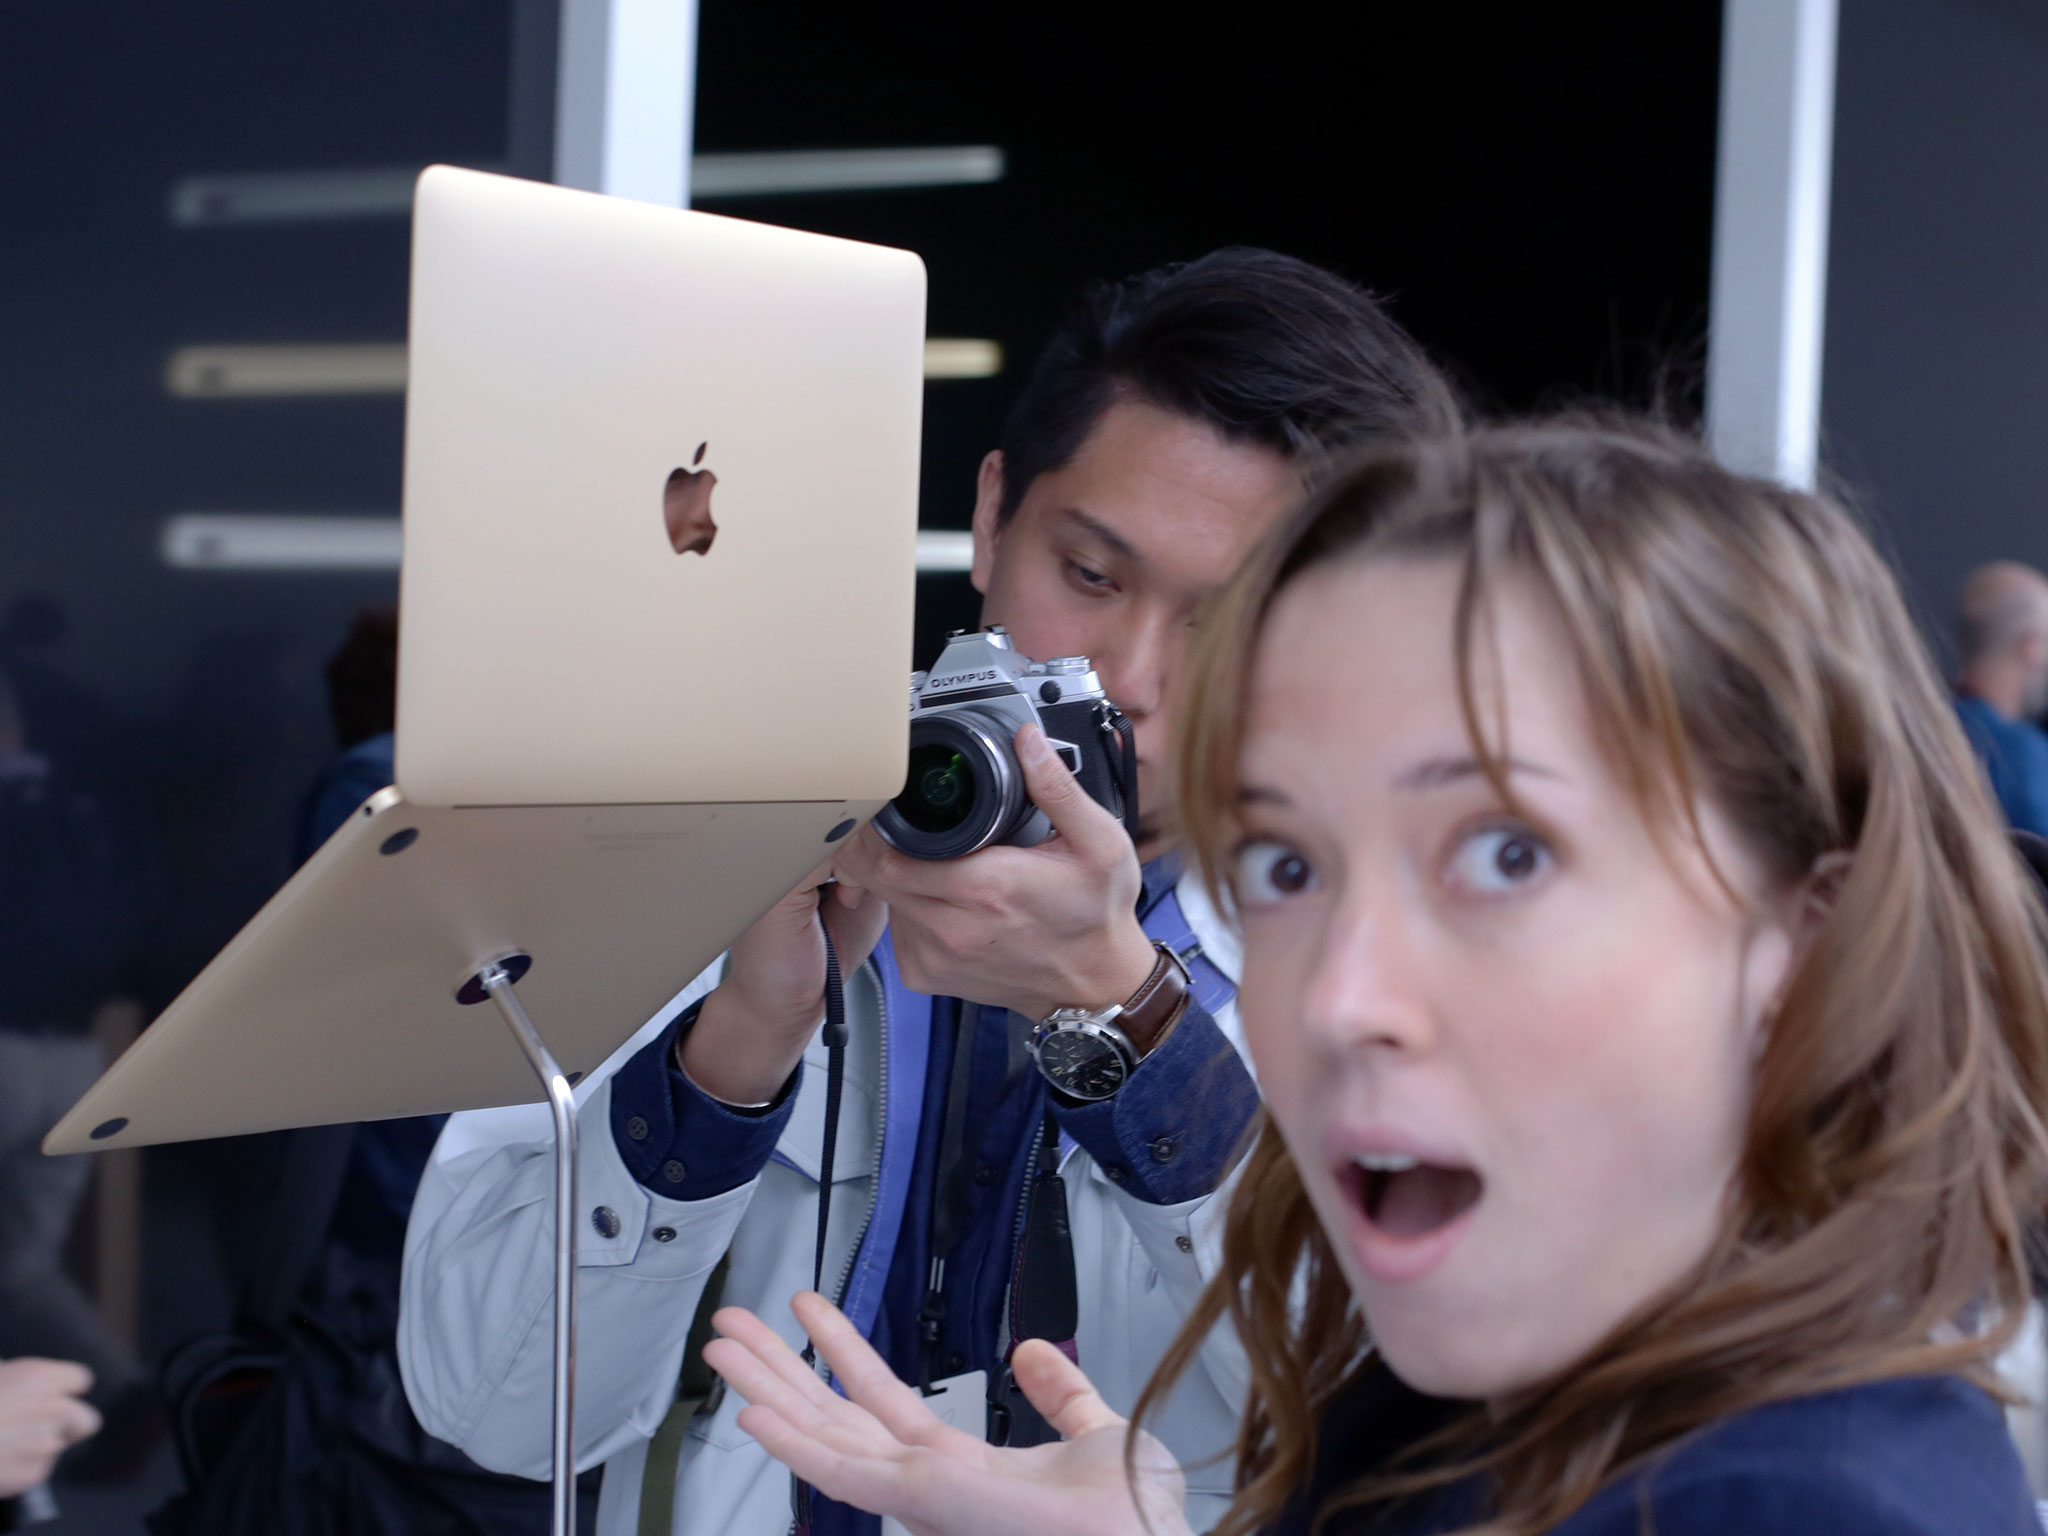 The new MacBook is for a lot of people, even if it's not for you